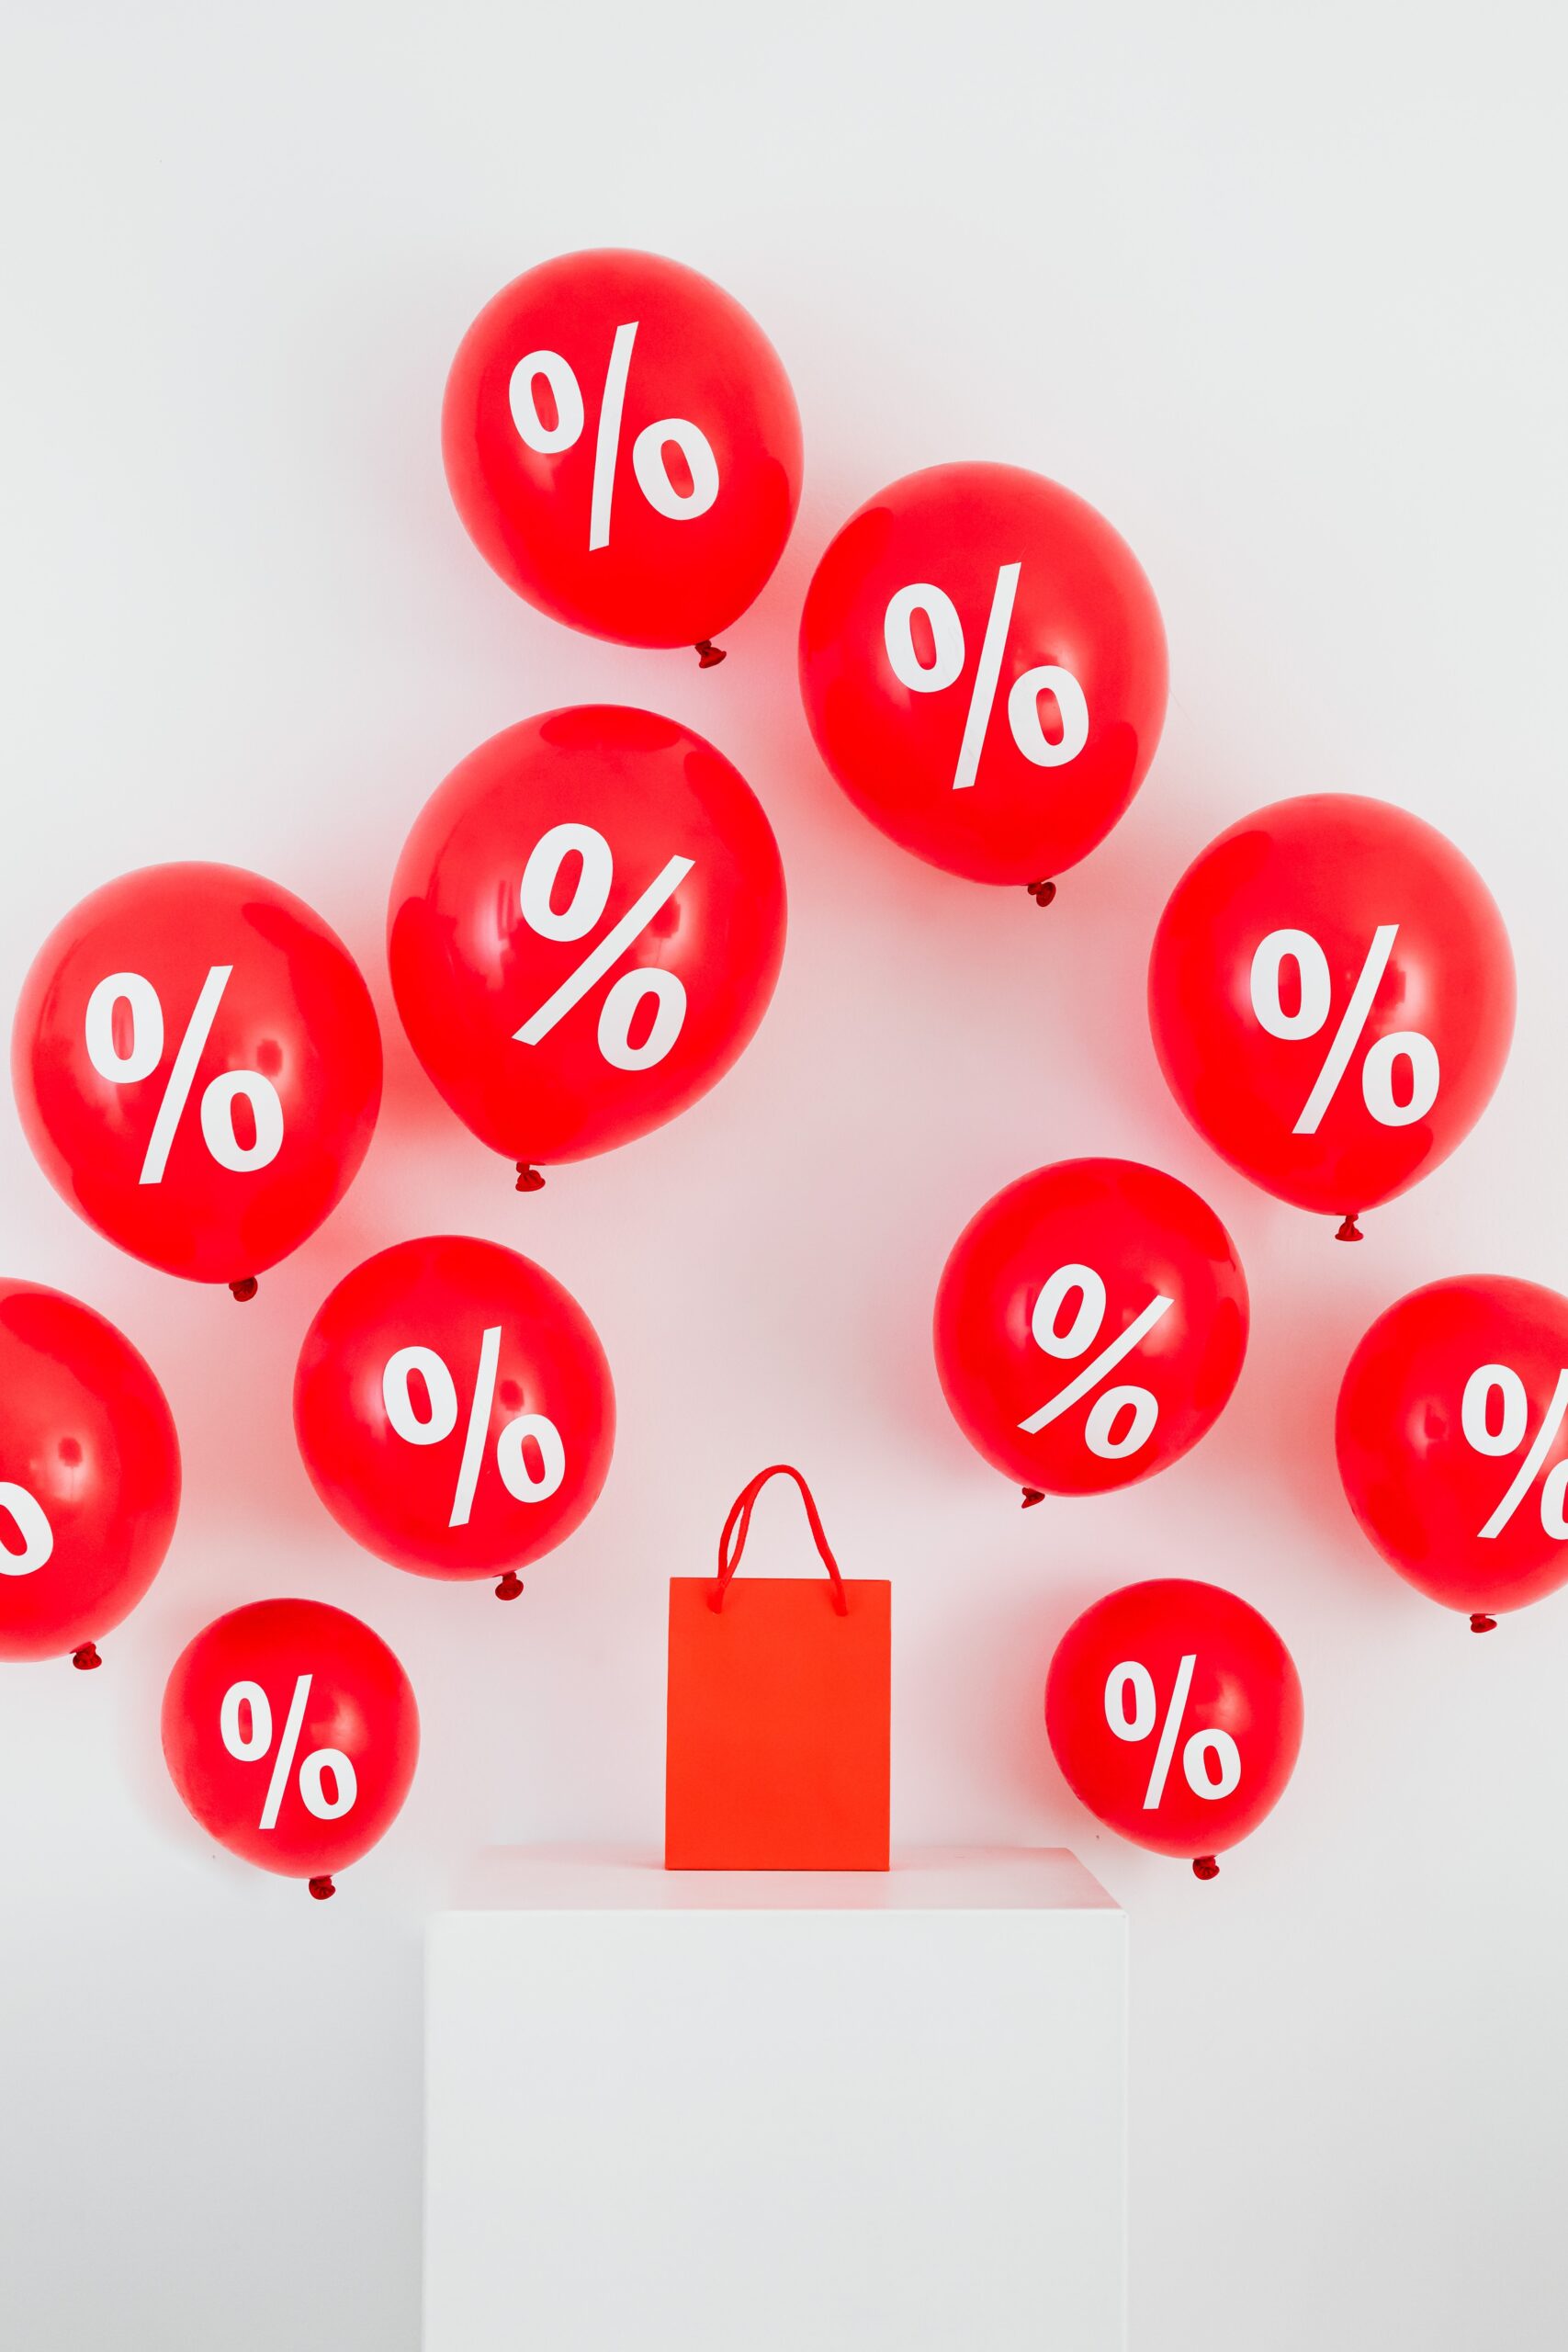 red balloons printed with percentage signs